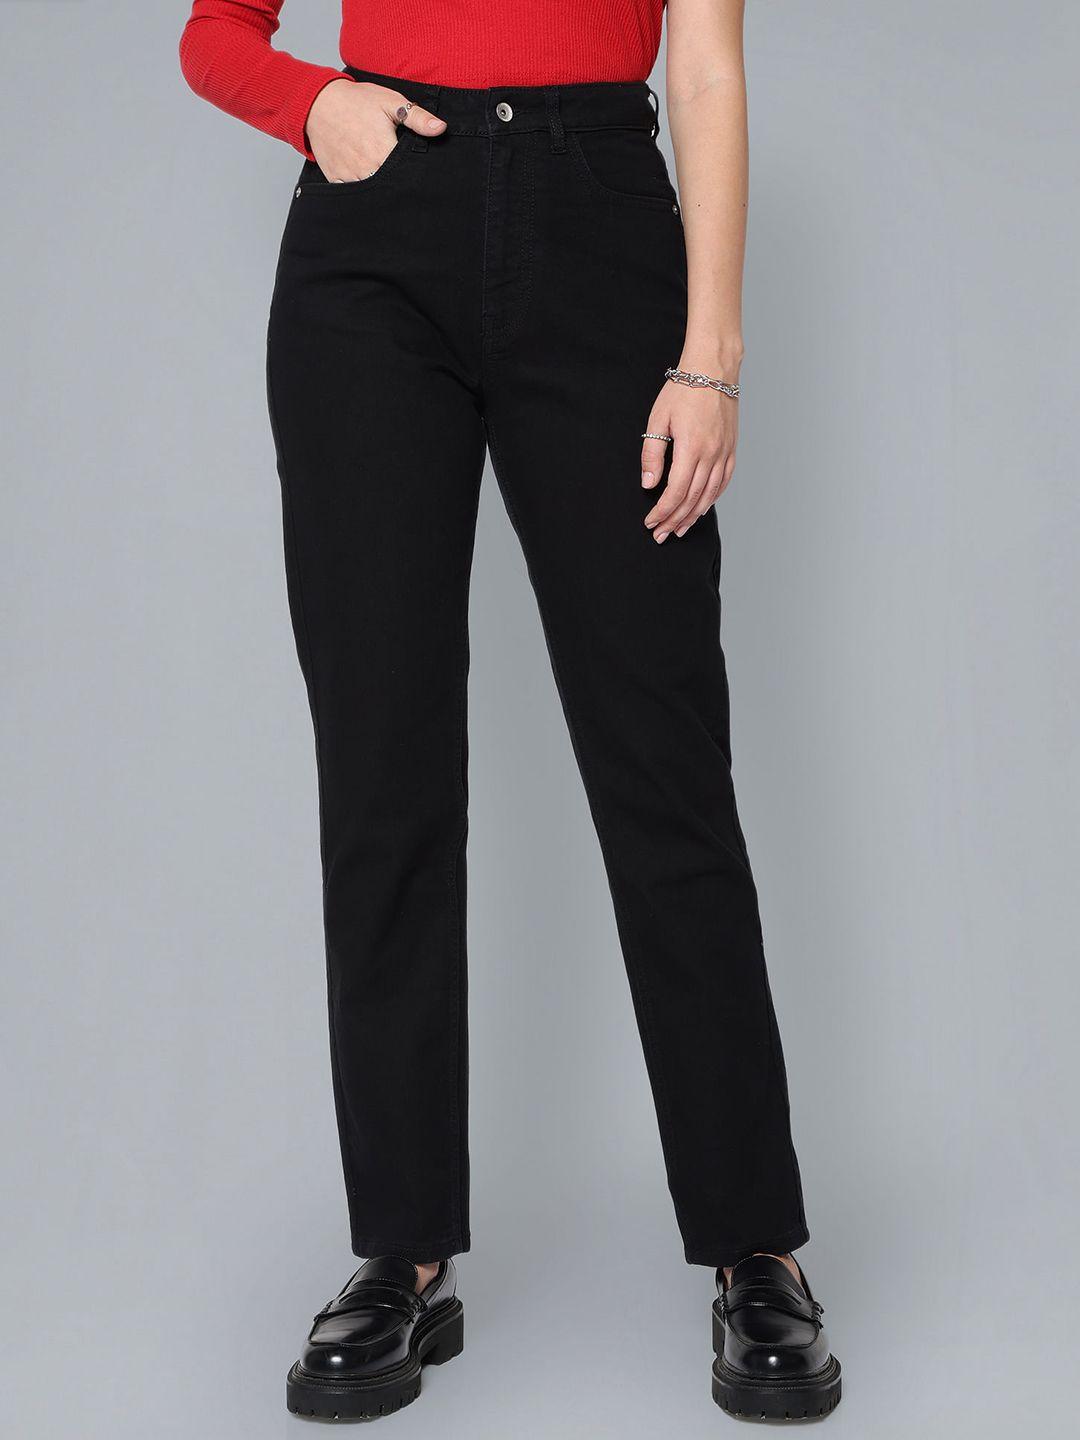 flying-machine-women-high-rise-straight-fit-clean-look-stretchable-jeans